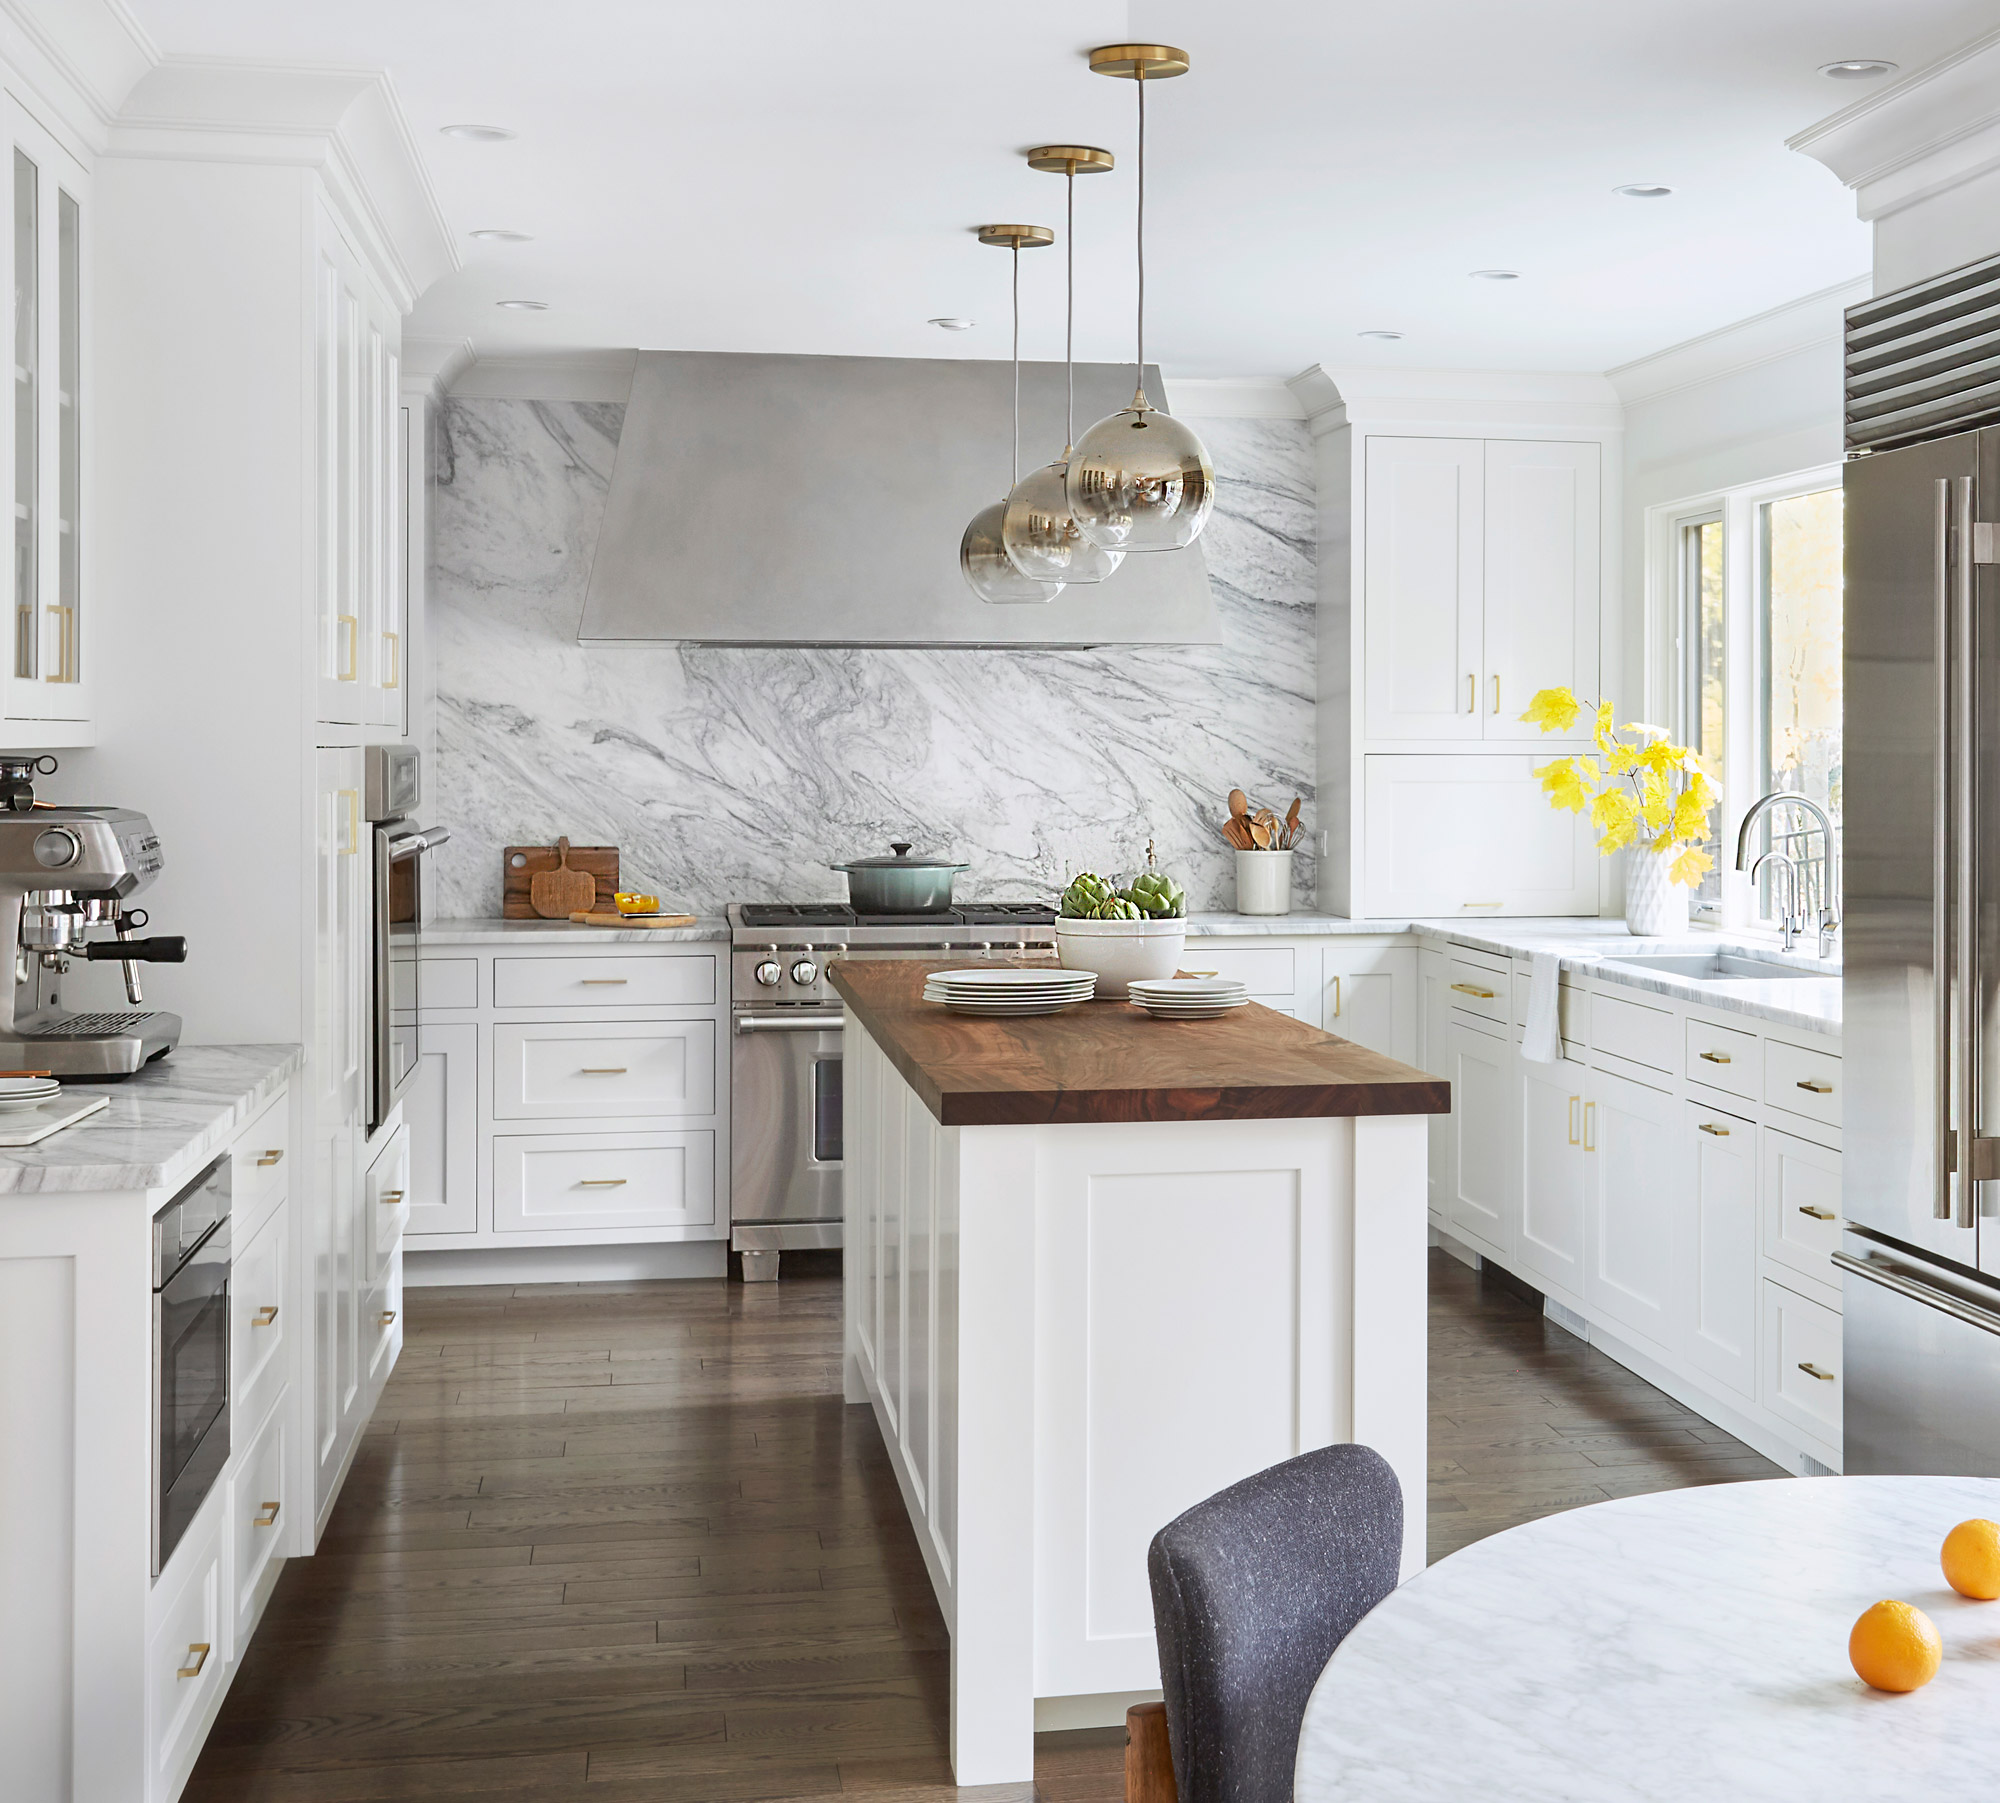 Are White Kitchens In or Out?